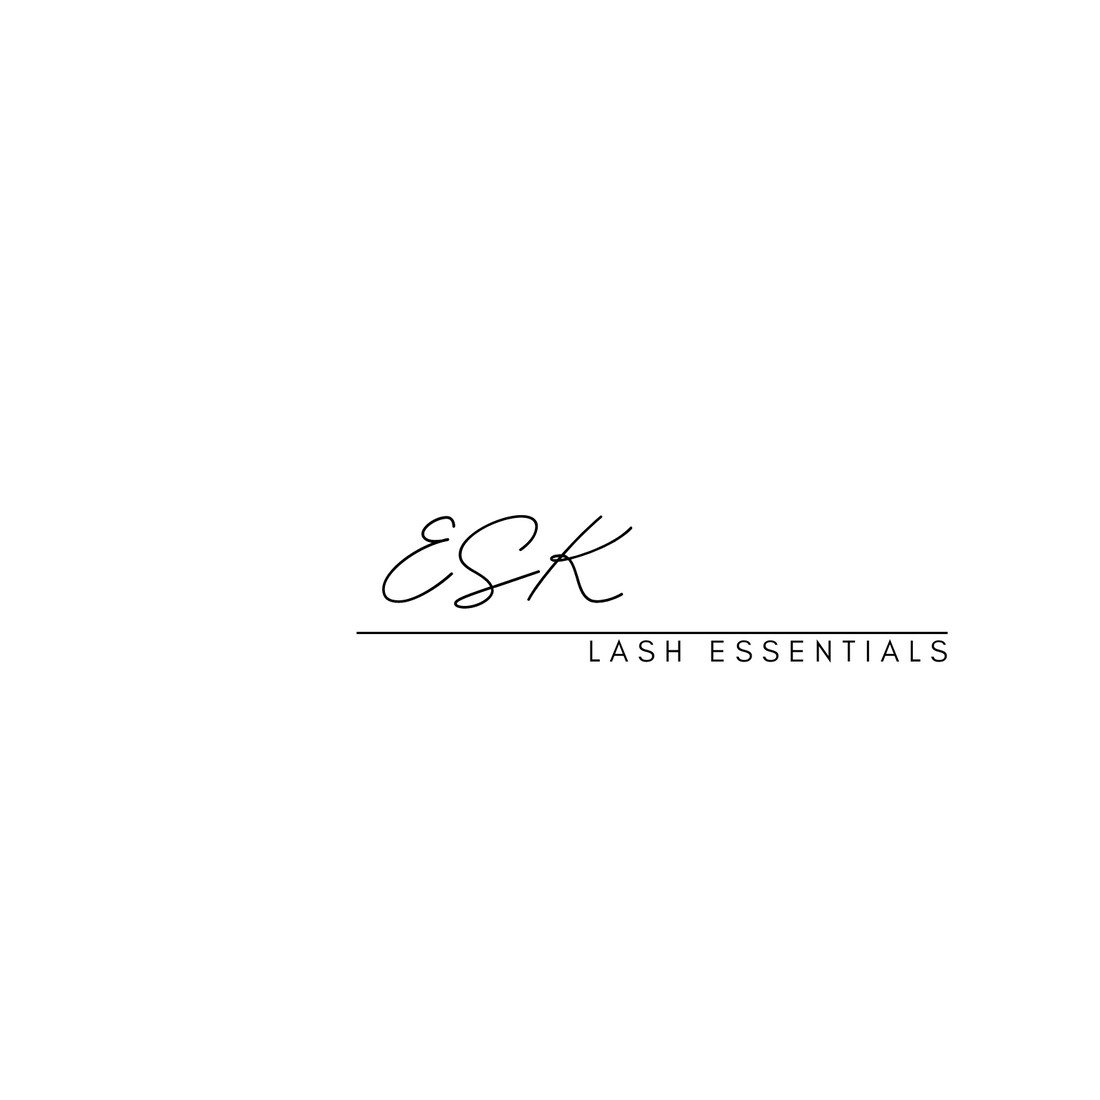 Enhance your classic lash extension sets with ESK lash Extension Essentials! | ESK eyelash extension products and supplies